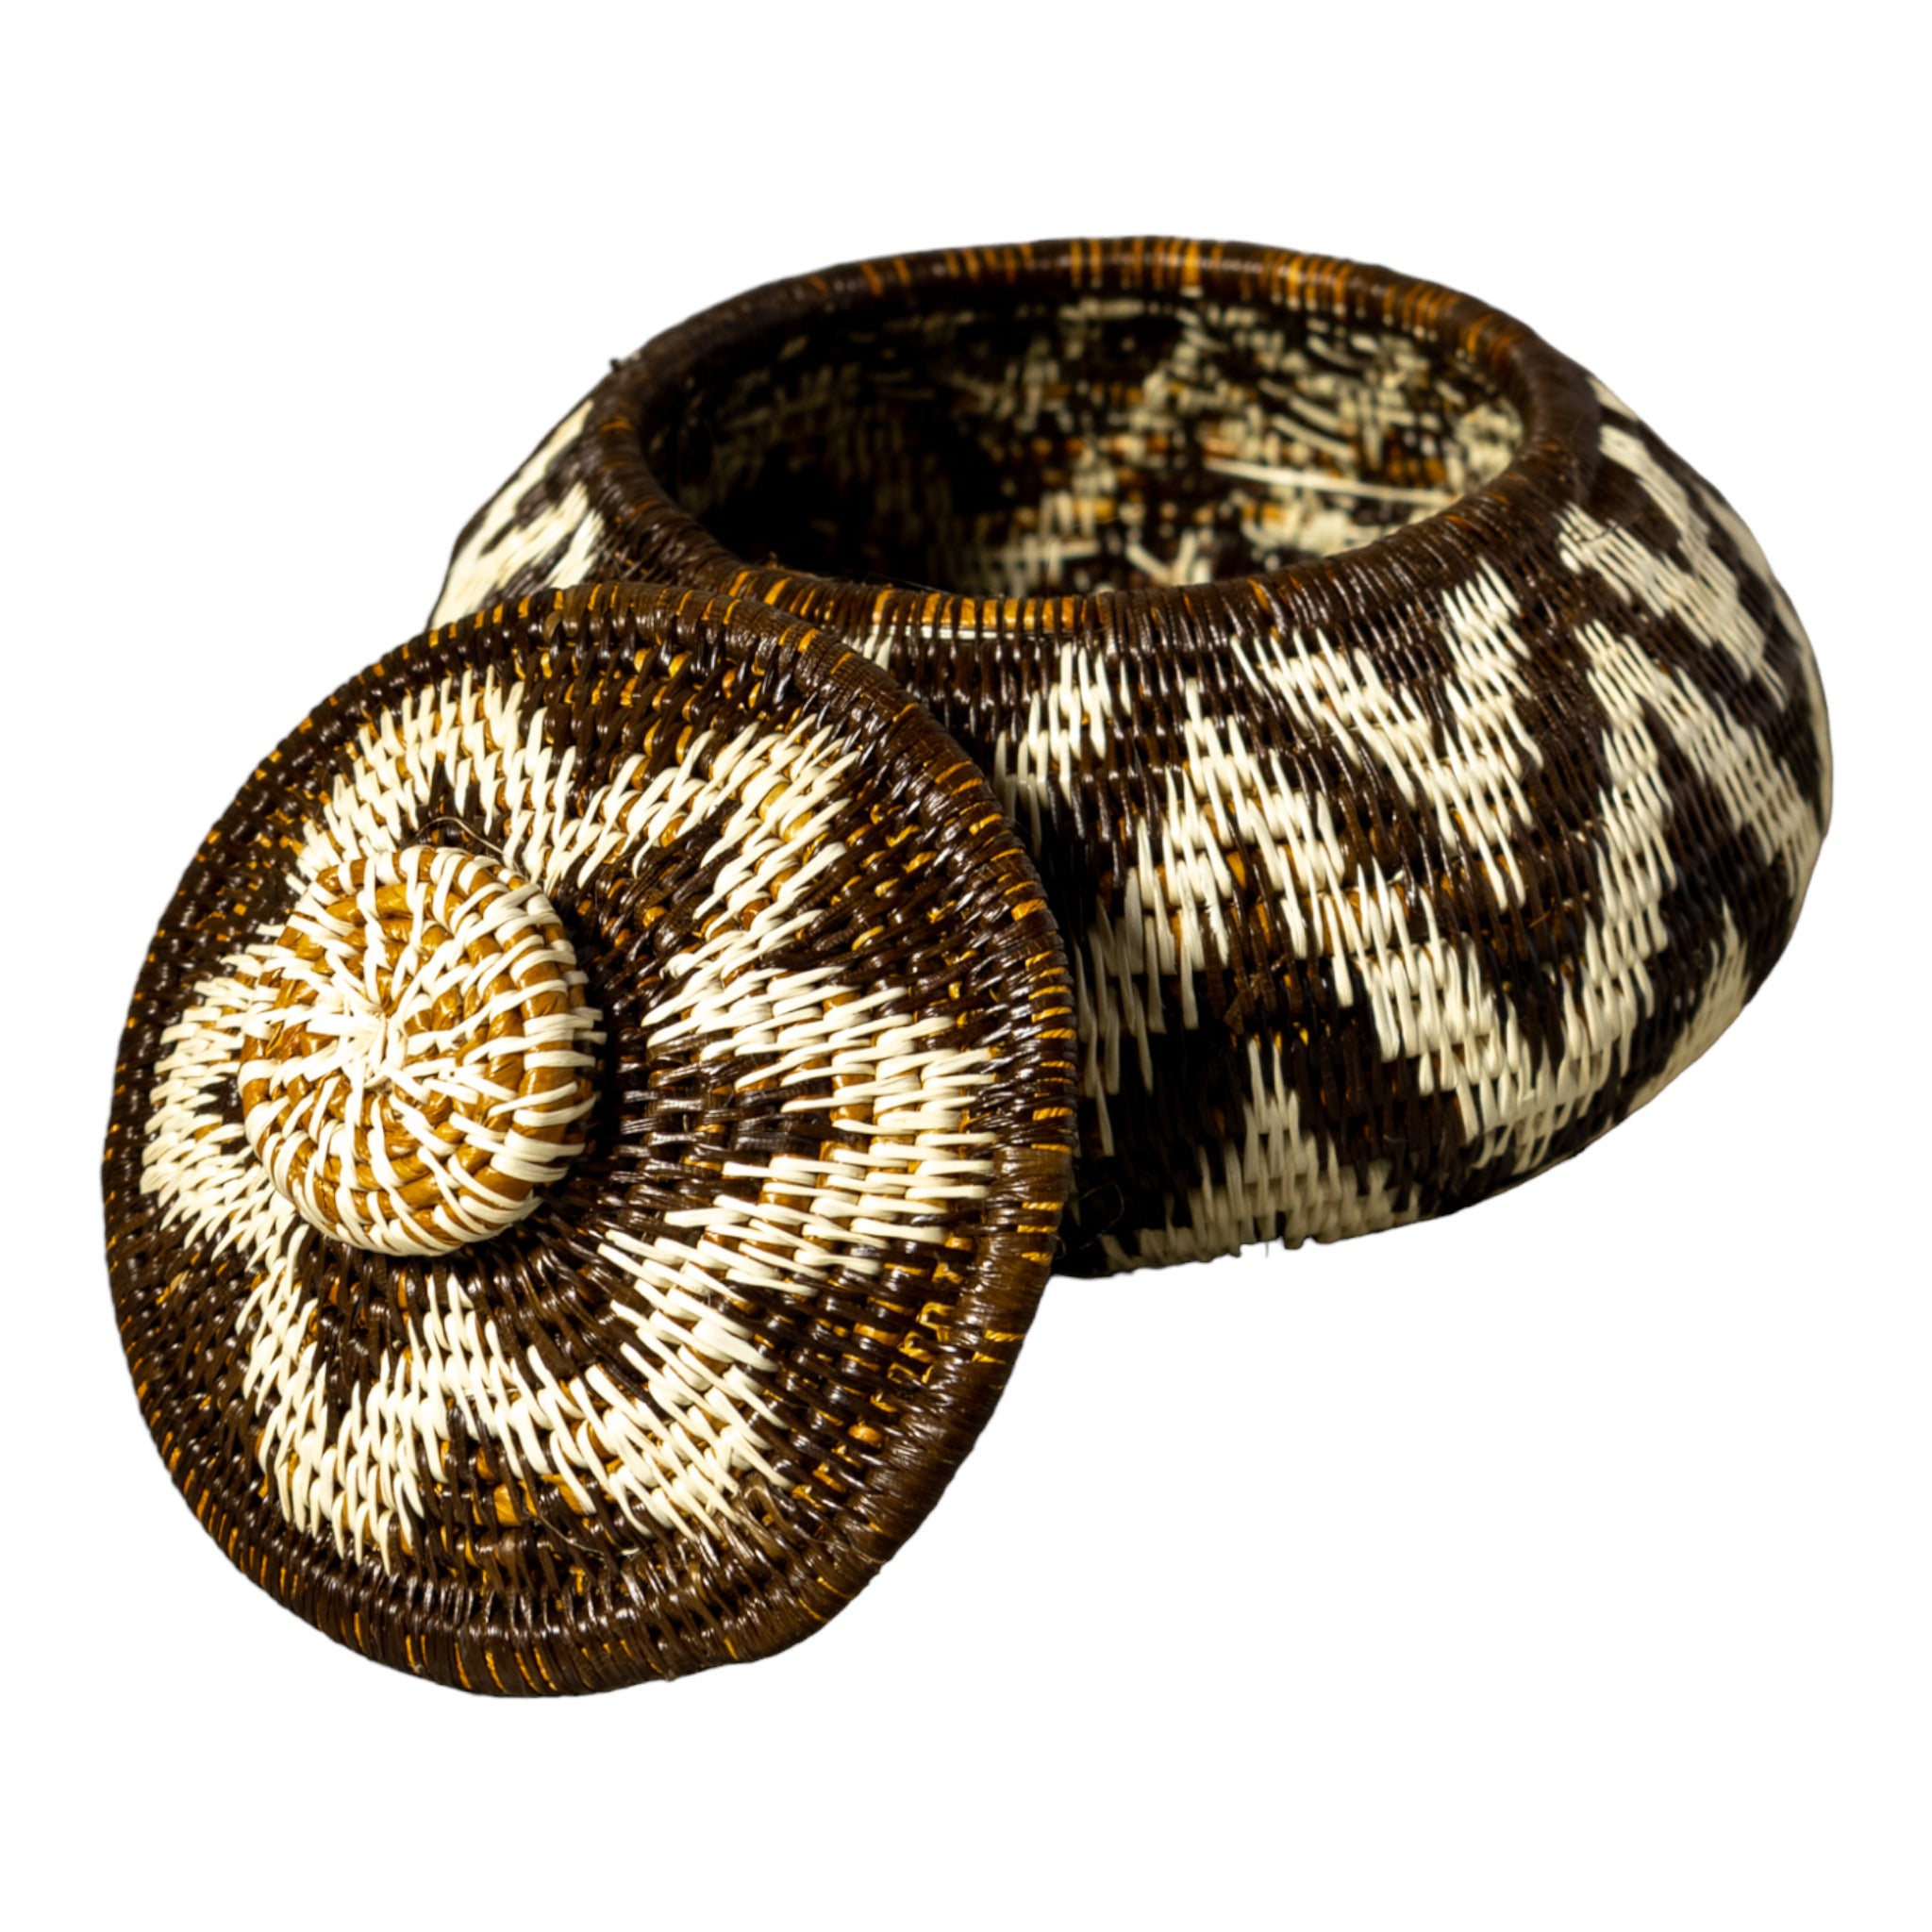 ZigZag Tropical Knot Basket With Top